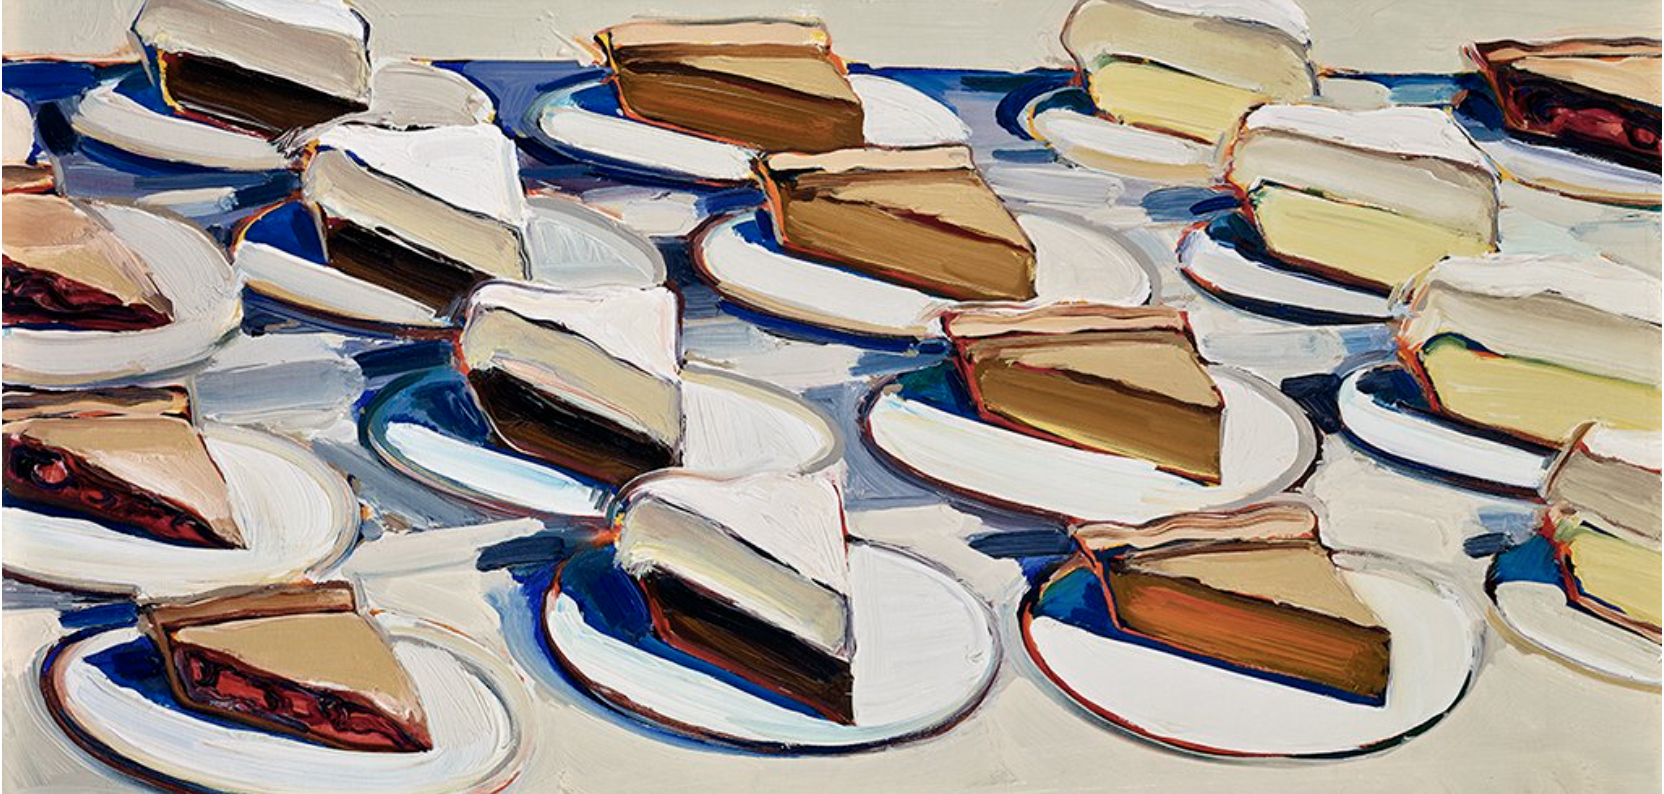 Top Image: Wayne Thiebaud, Pies, Pies, Pies, 1961. Oil on canvas, 20 x 30 in. Crocker Art Museum, gift of Philip L. Ehlert in memory of Dorothy Evelyn Ehlert, 1974.12. © 2021 Wayne Thiebaud / Licensed by VAGA at Artists Rights Society (ARS), NY.